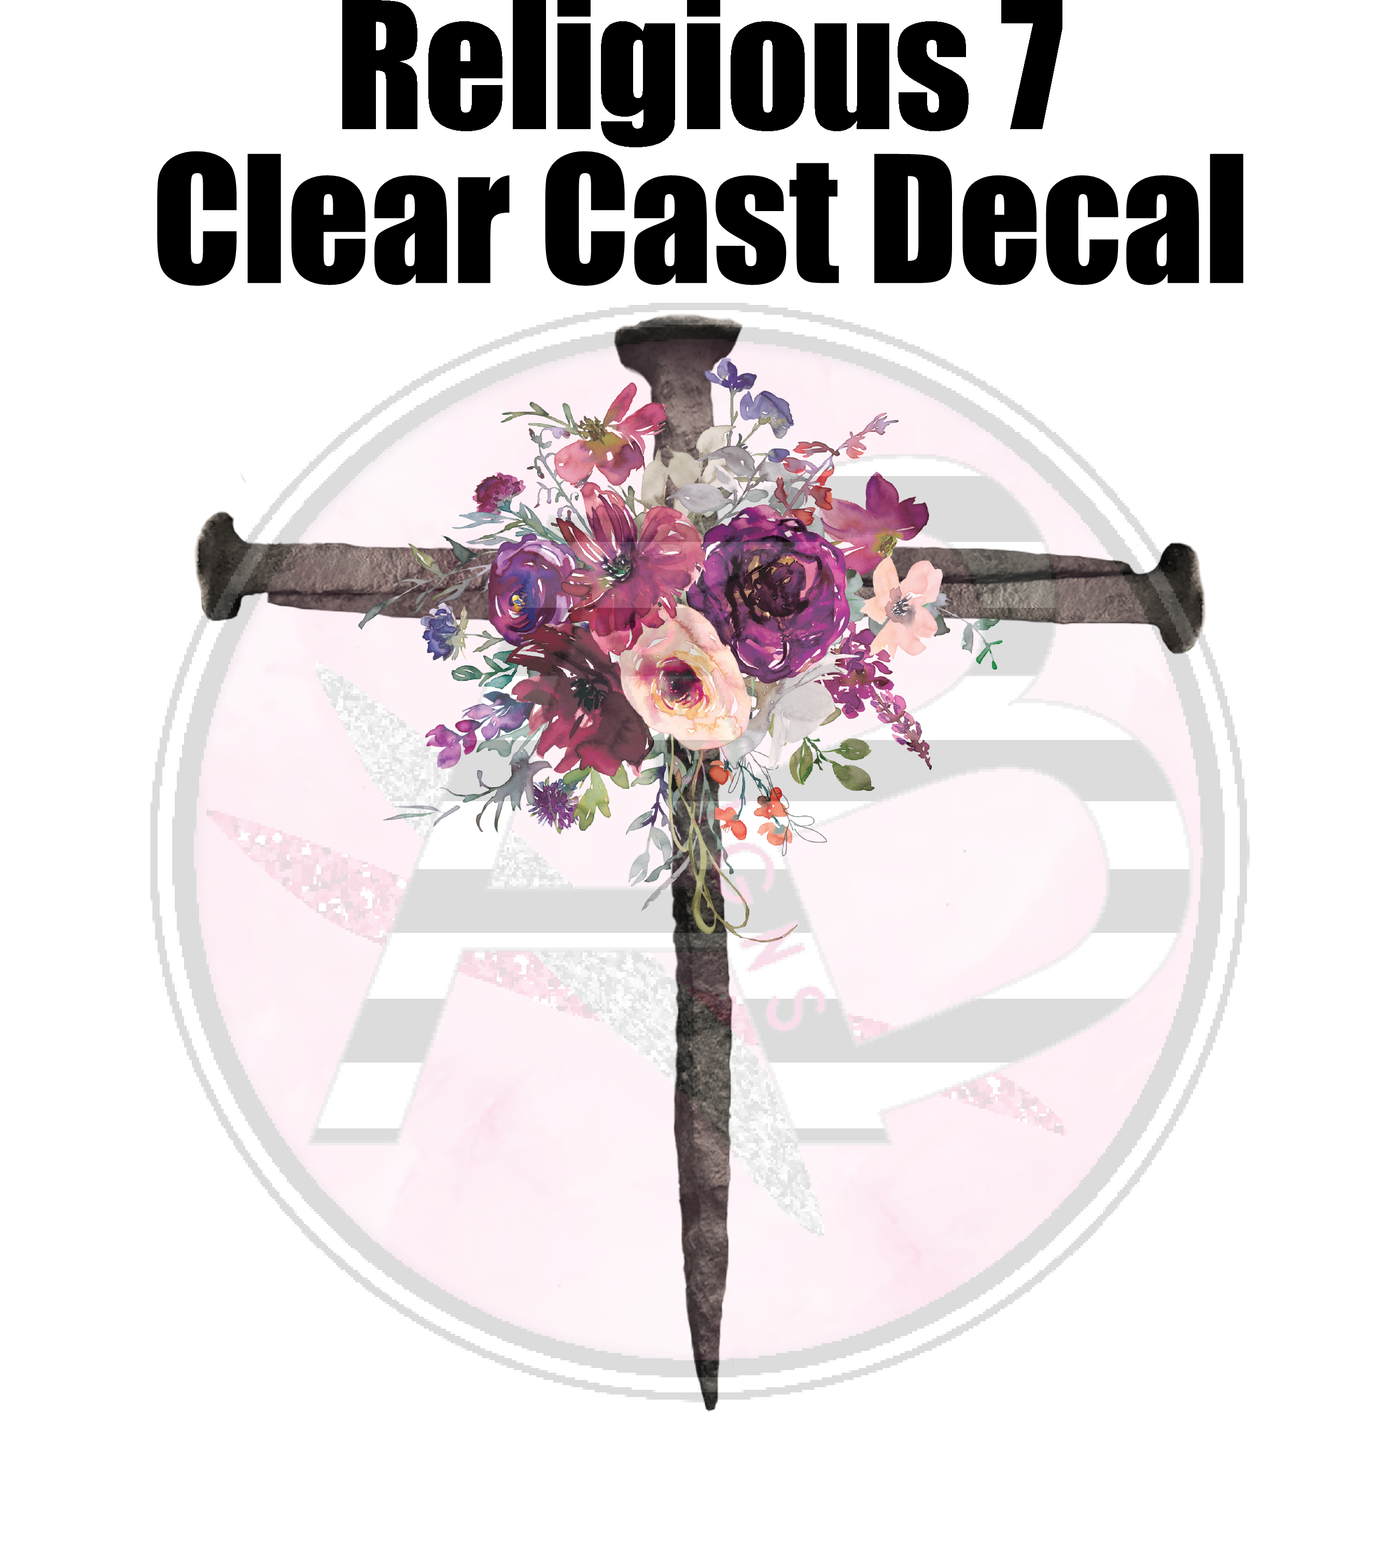 Religious 7 - Clear Cast Decal